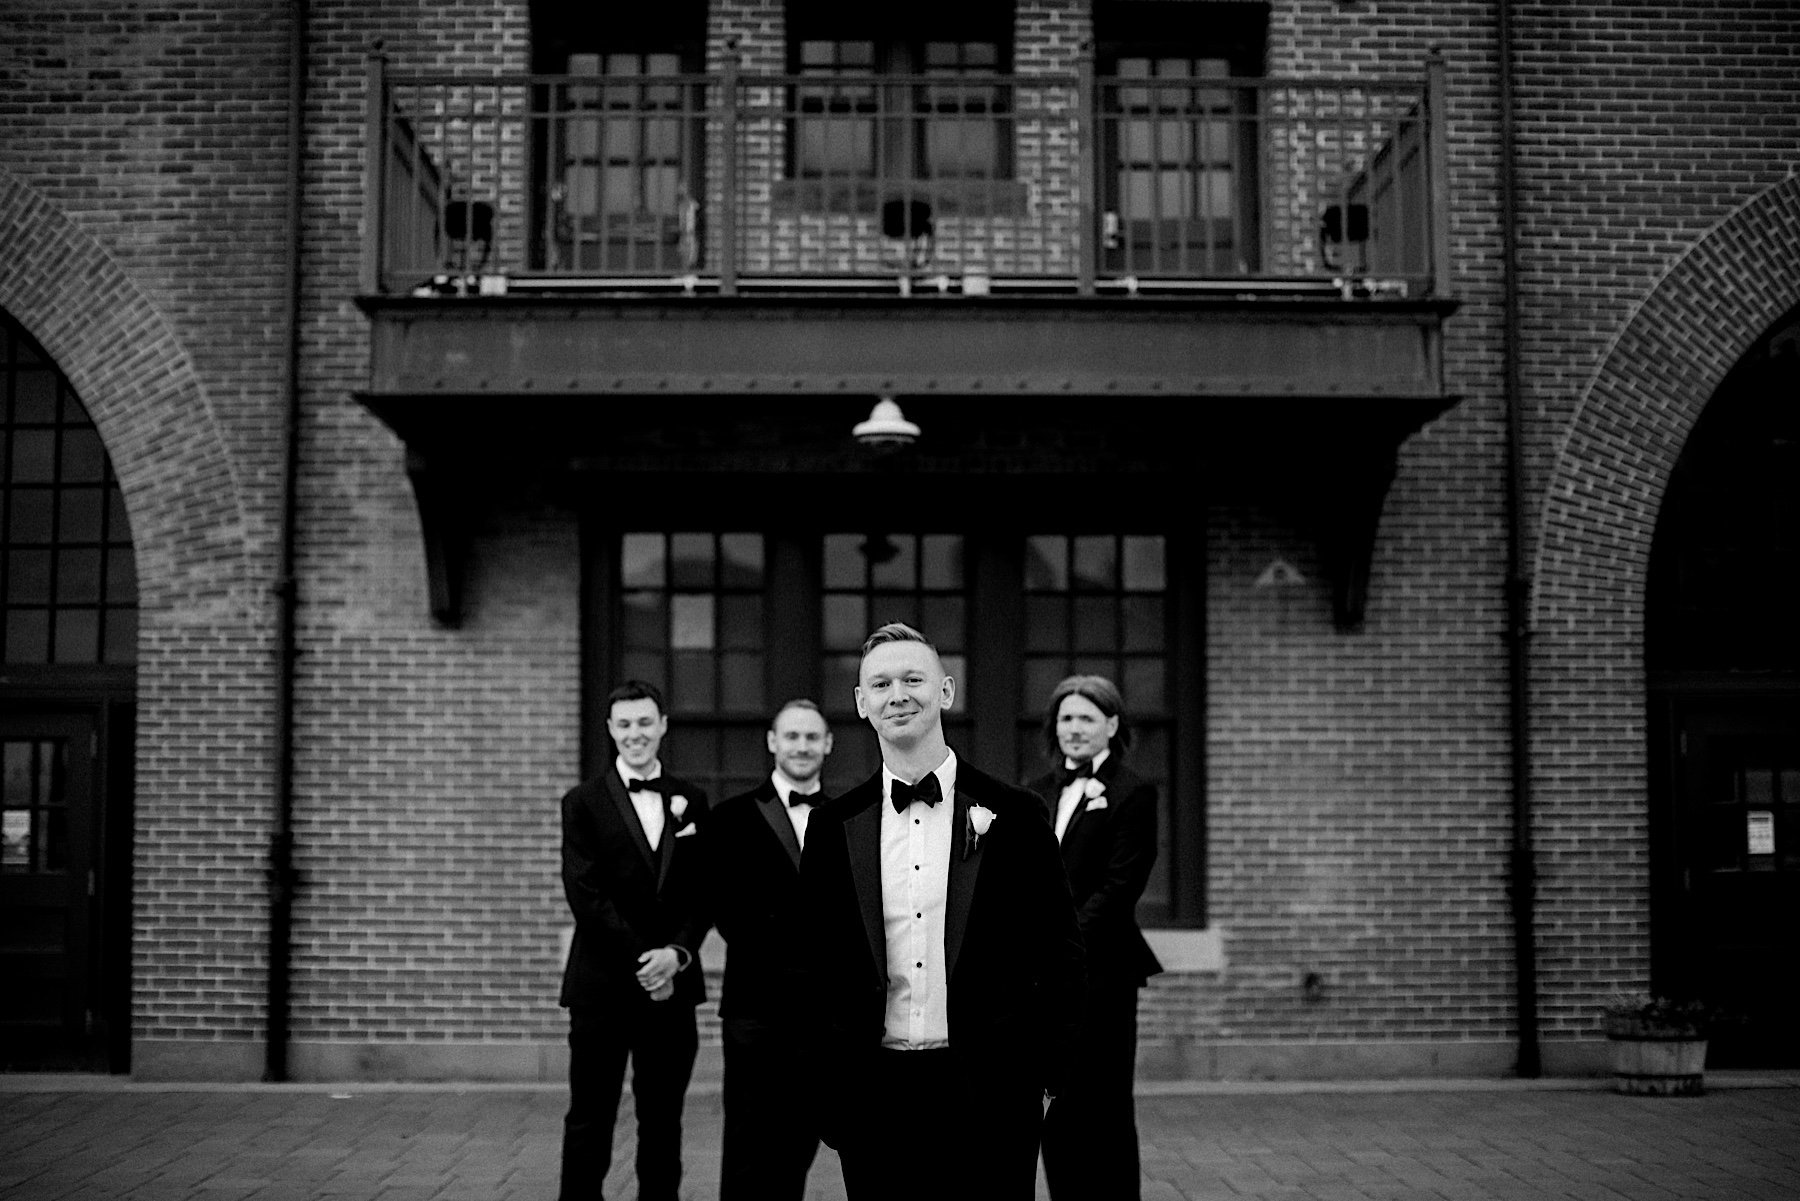 50_groom with groomsmen photo central railroad of new jersey.jpg